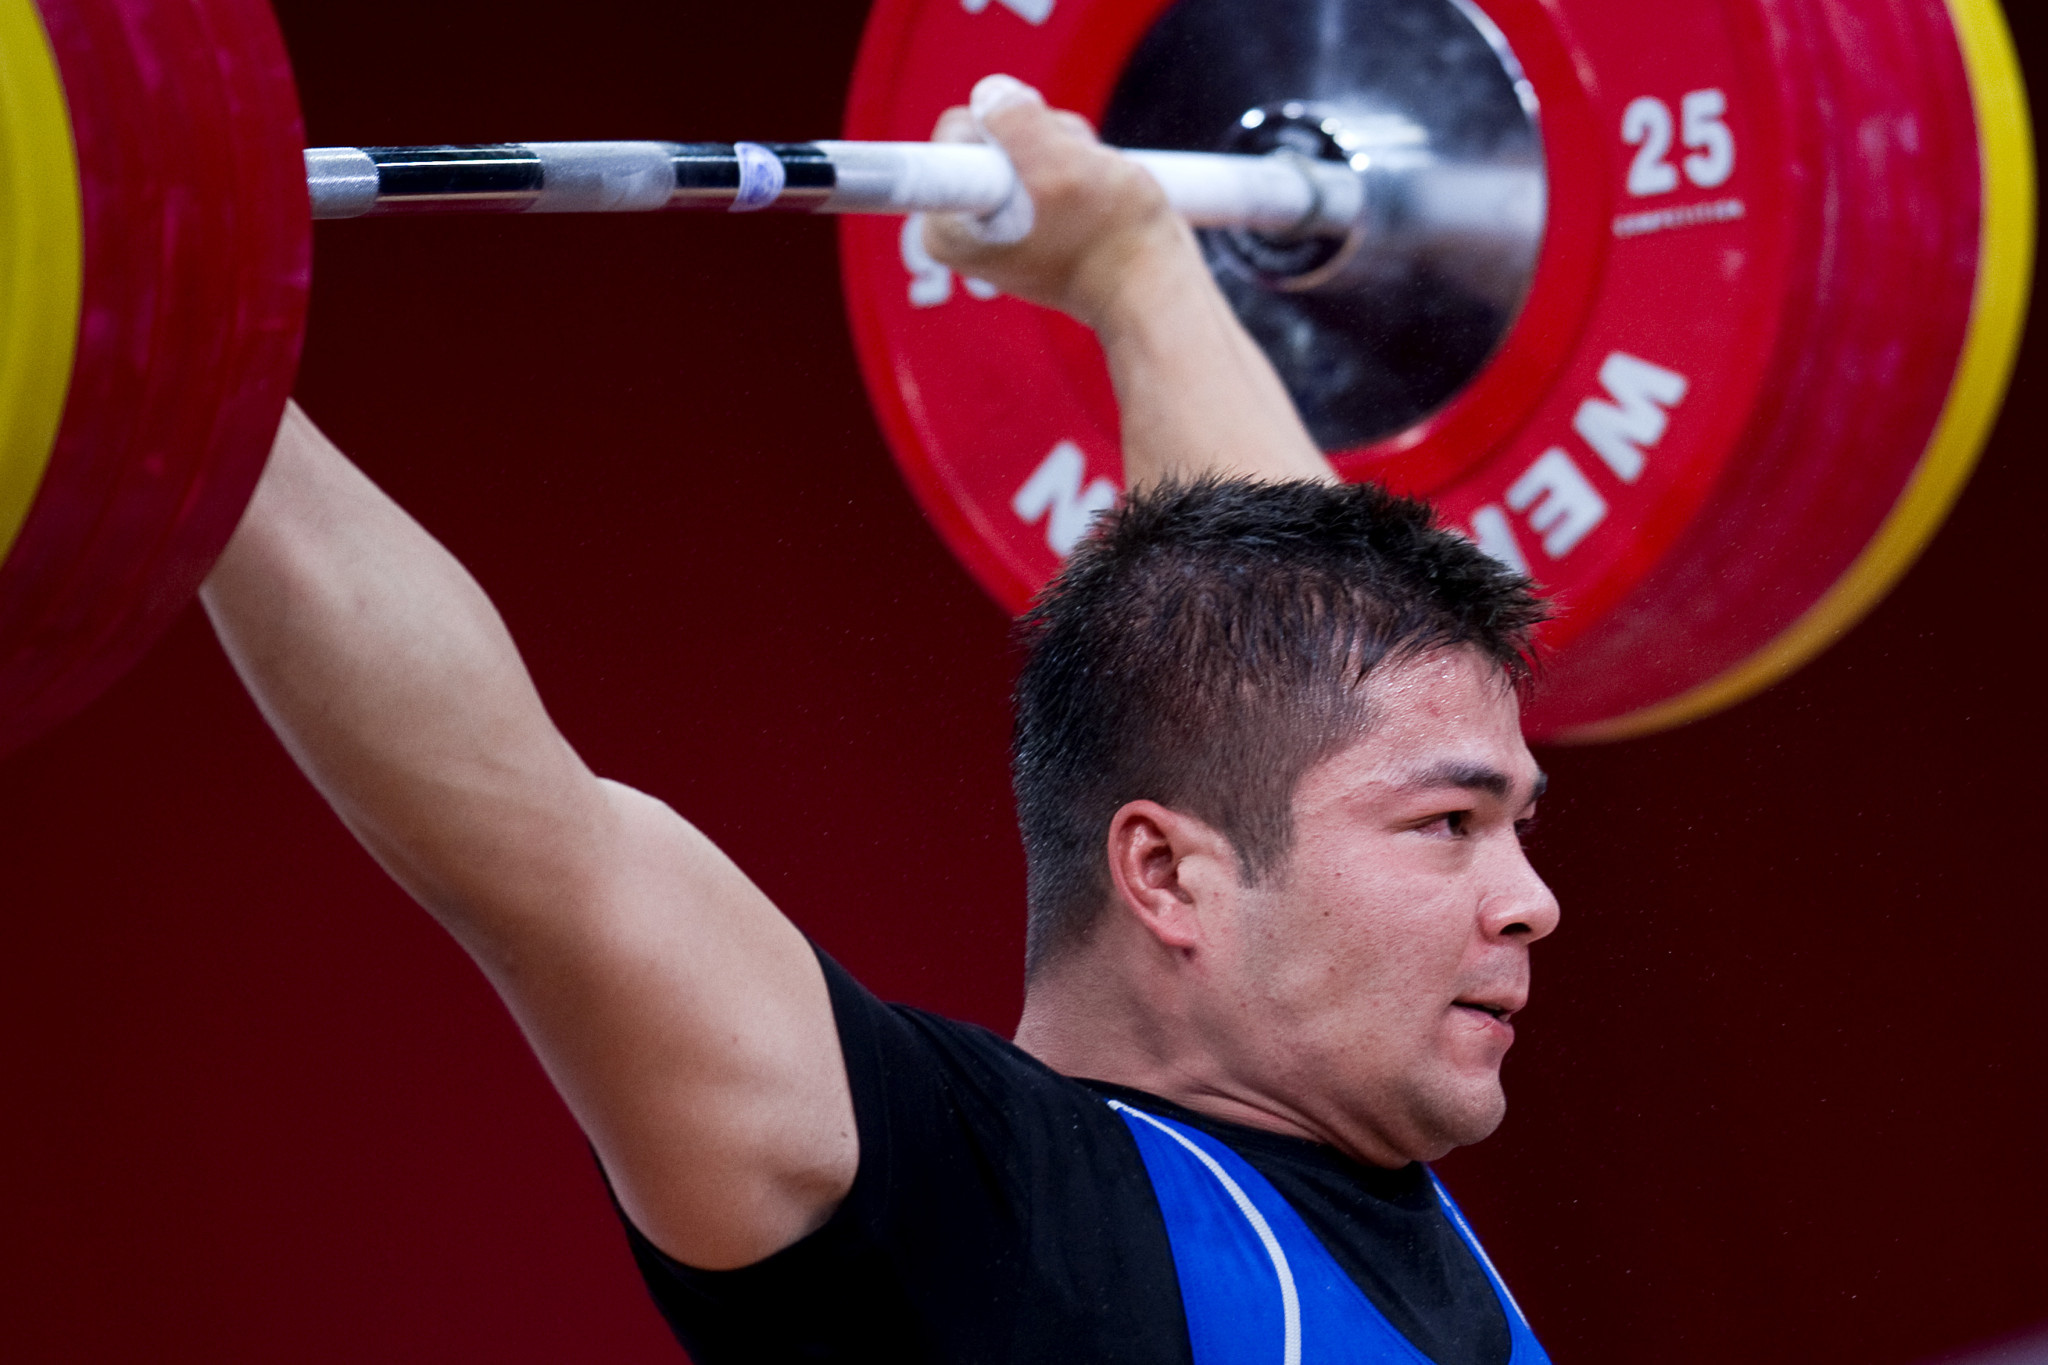 Olympian Sedov is second Kazakhstan weightlifter to commit suicide